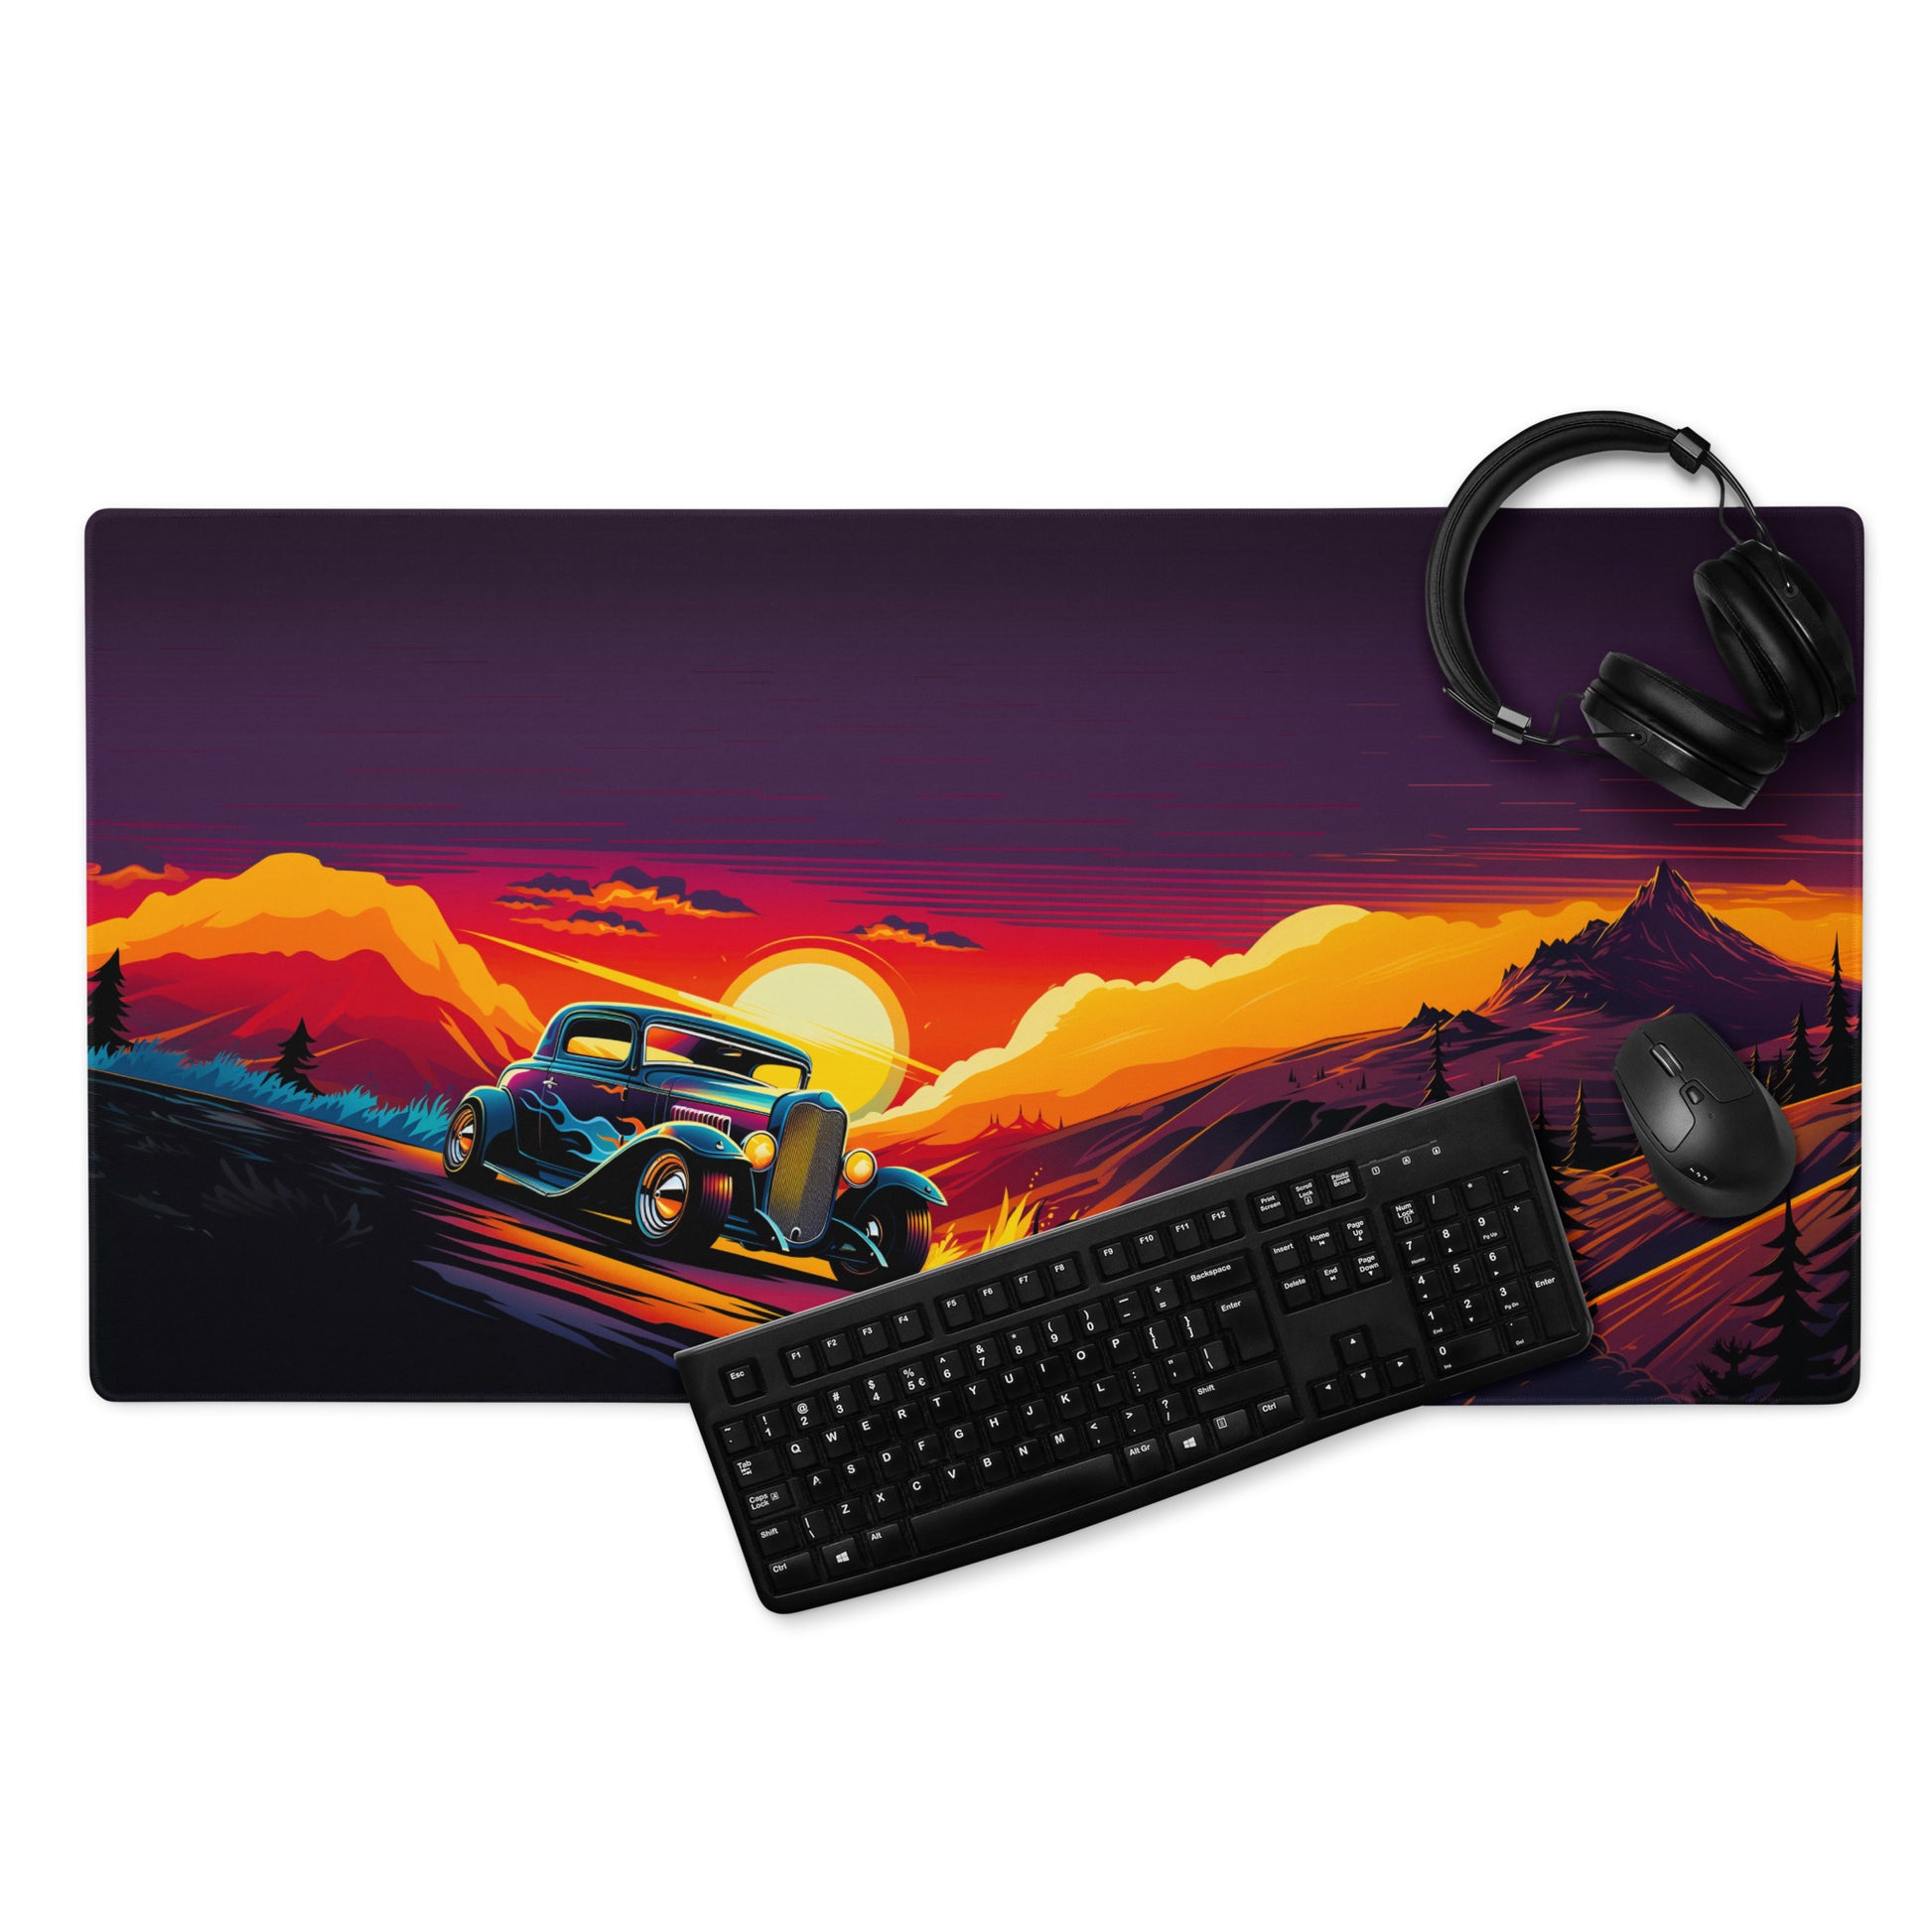 A 36" x 18" gaming desk pad with an old hot rod racing down a road with mountains in the background displayed with a keyboard, mouse and headphones. Purple and Orange in color. 